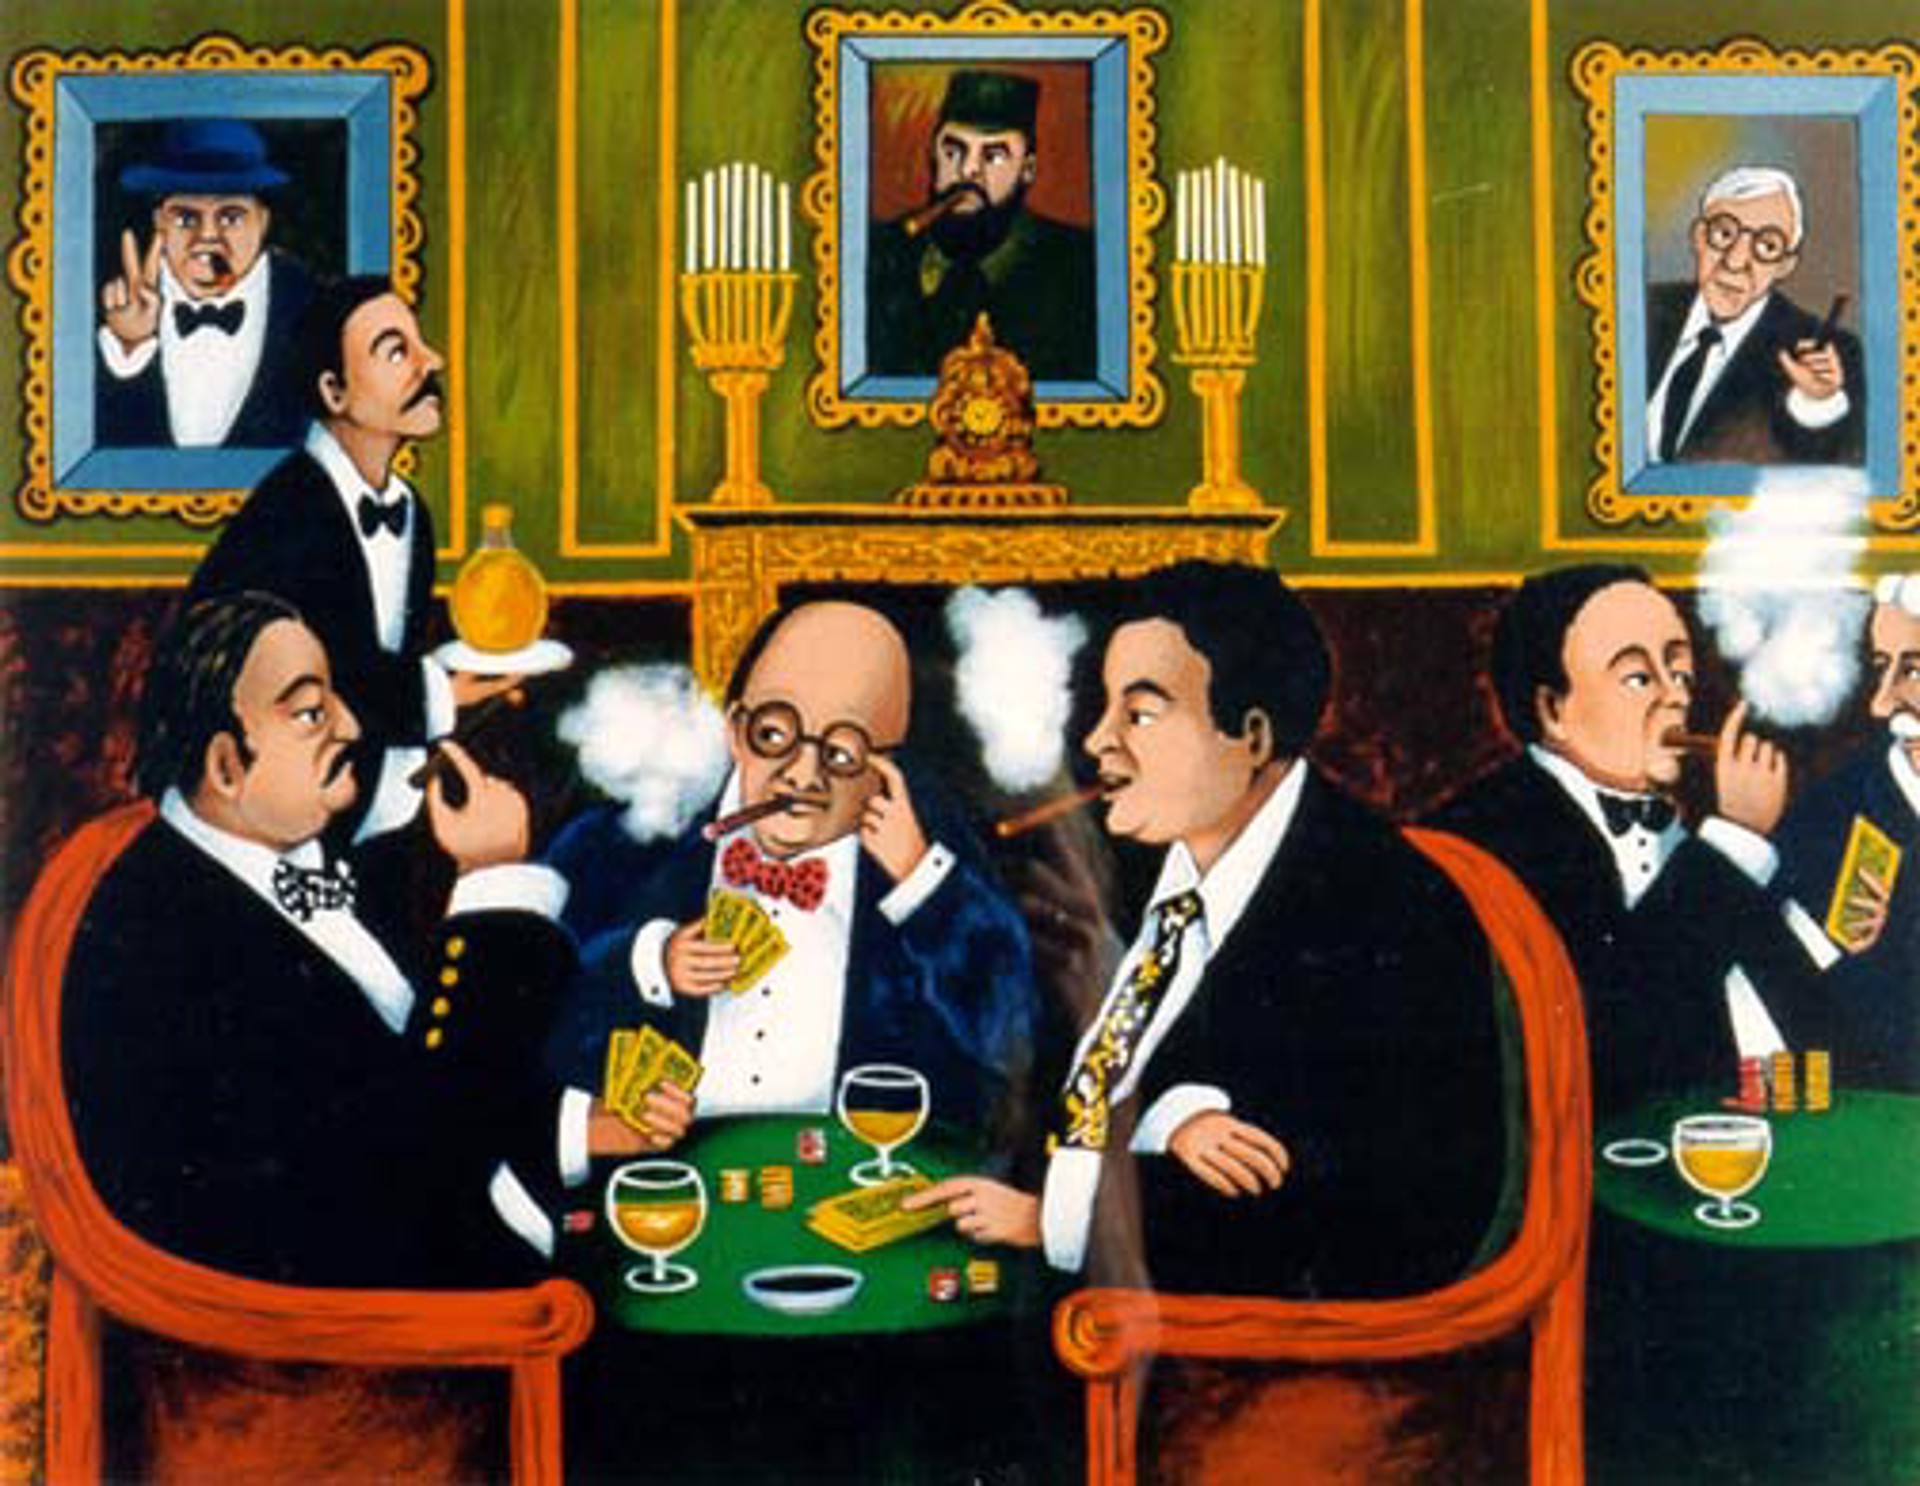 Poker Night At The Club by Guy Buffet